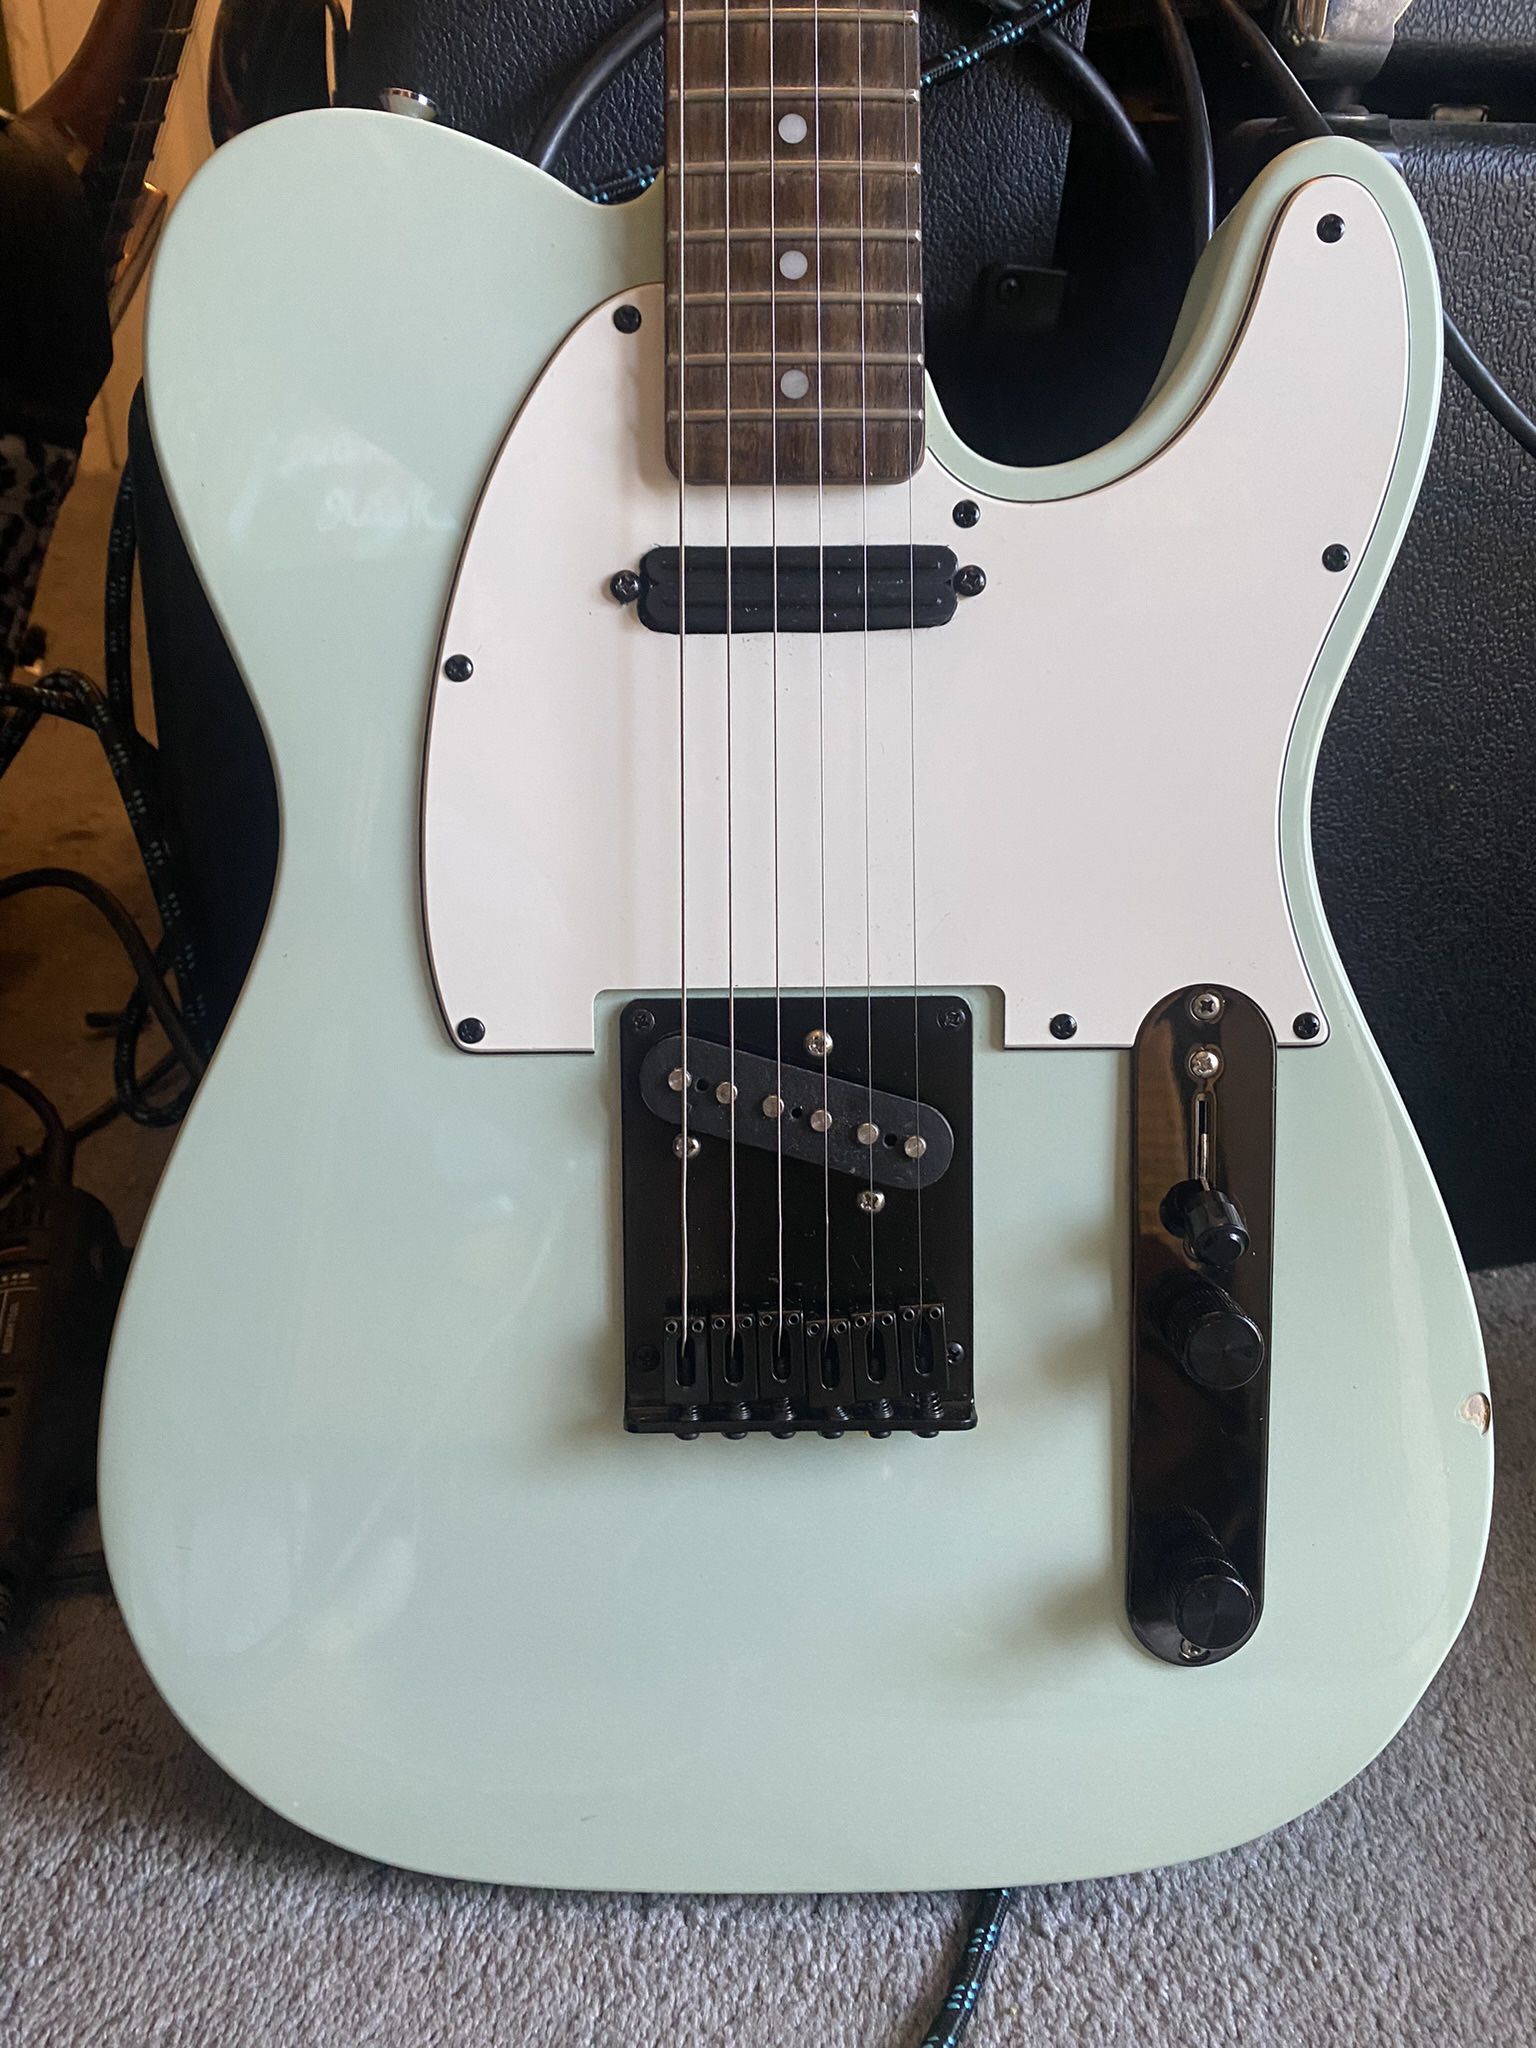 Fender Squier Tele With Push Pull Pots